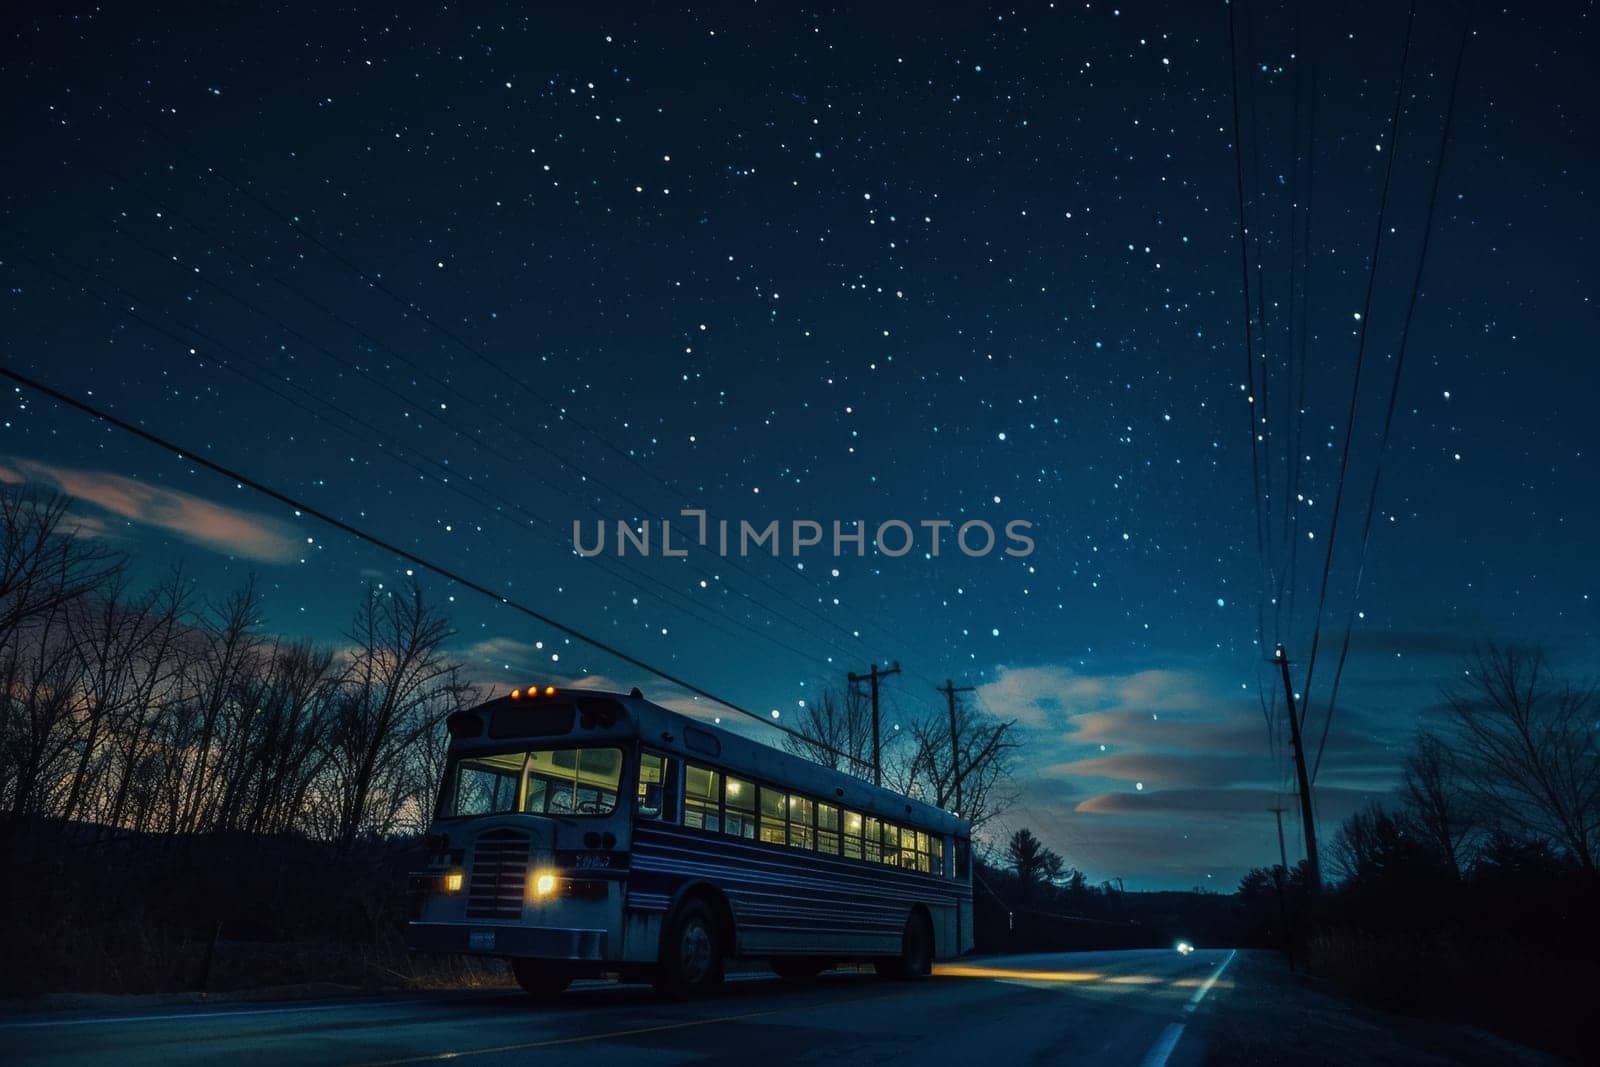 A bus travels through the night under a starlit sky, offering a tranquil nocturnal scene.